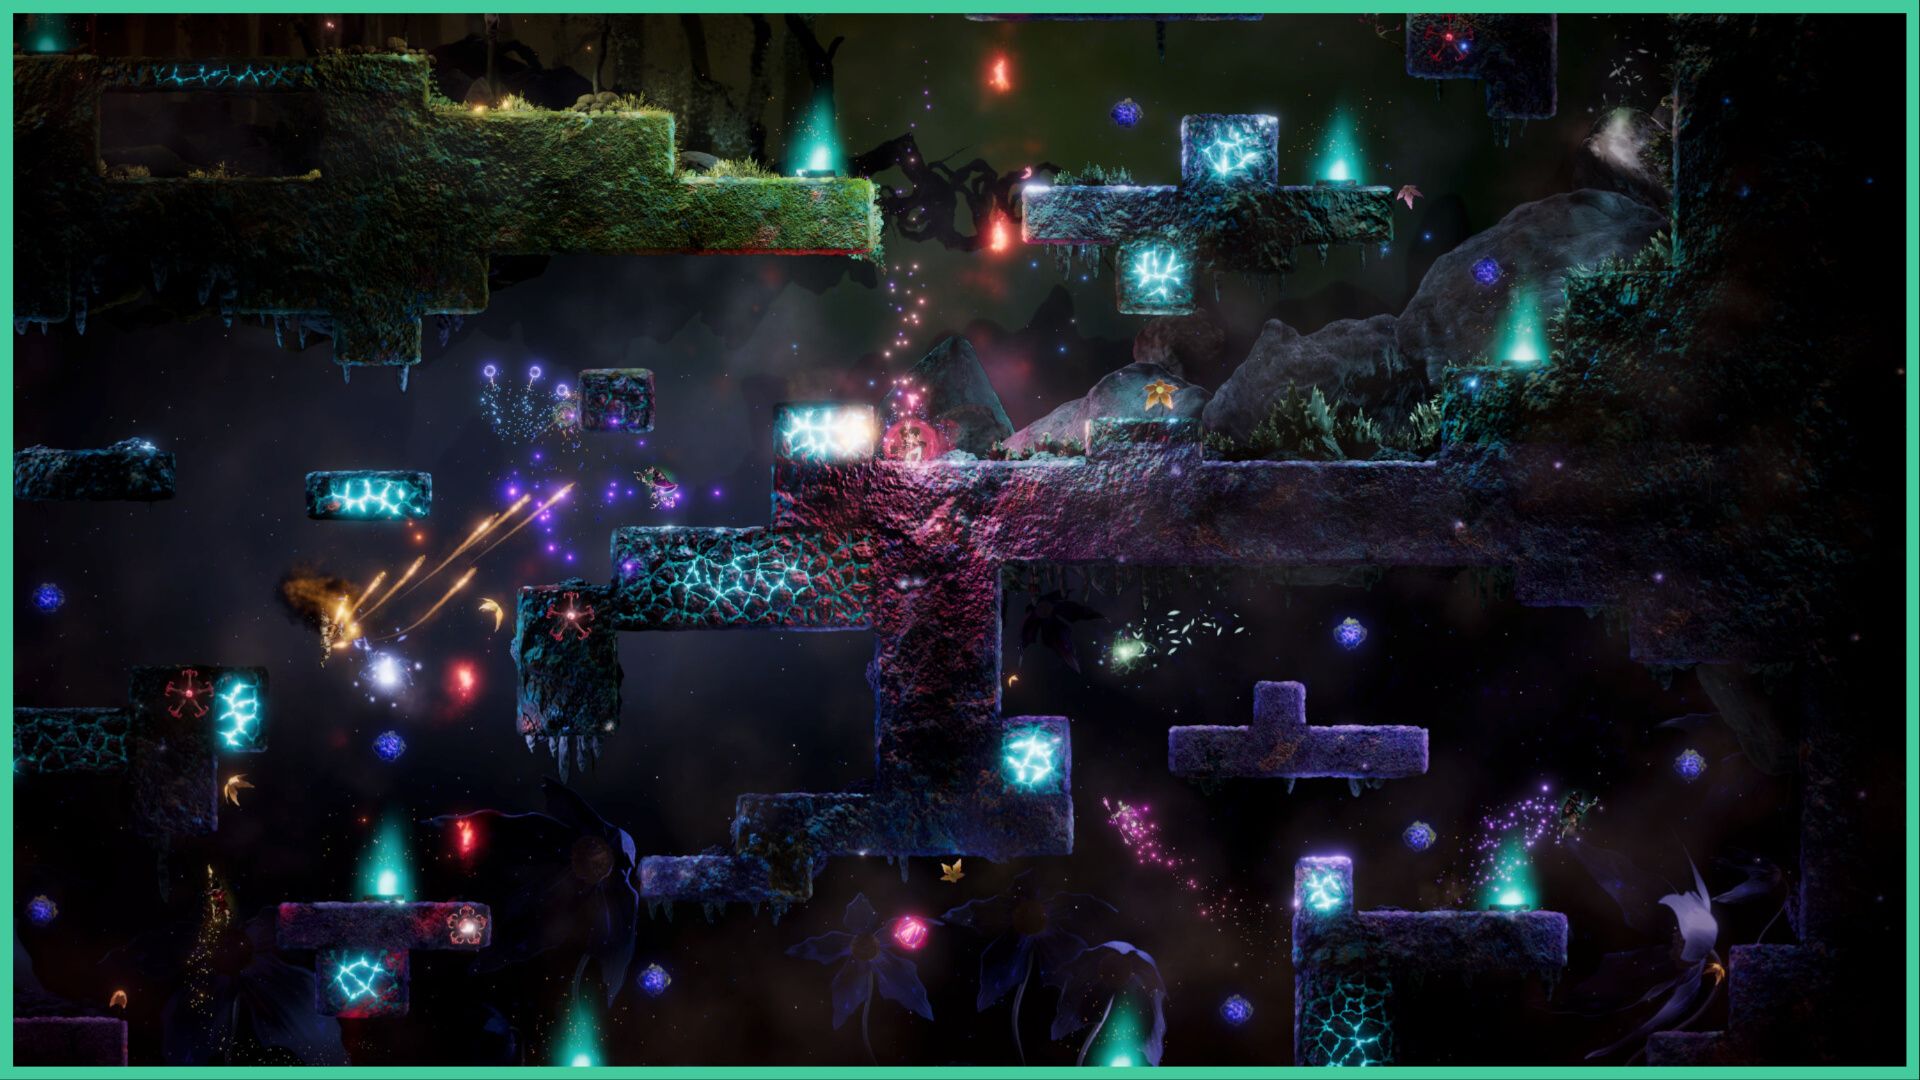 feature image for our manaclysm news, the image features a promo screenshot of the game of one of the battle maps with a variety of platforms, as spells fly across the screen with multiple players battling against each other